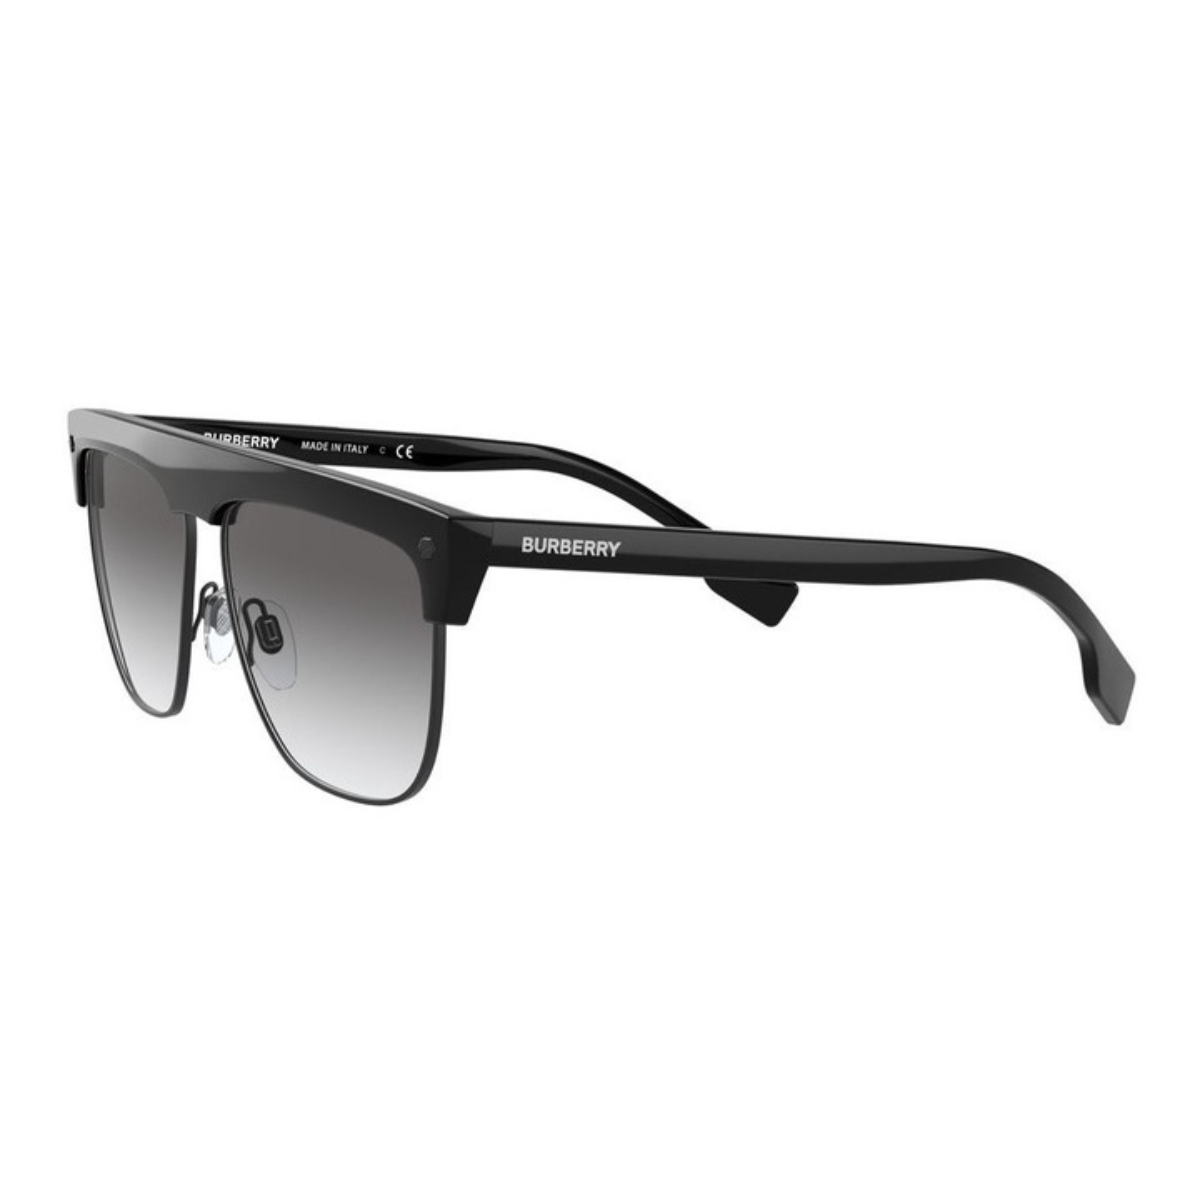 "Shop now for Burberry BE4325 300111 polarized sunglasses for men at Optorium: Fashionable square-shaped shades providing top-of-the-line eye protection."